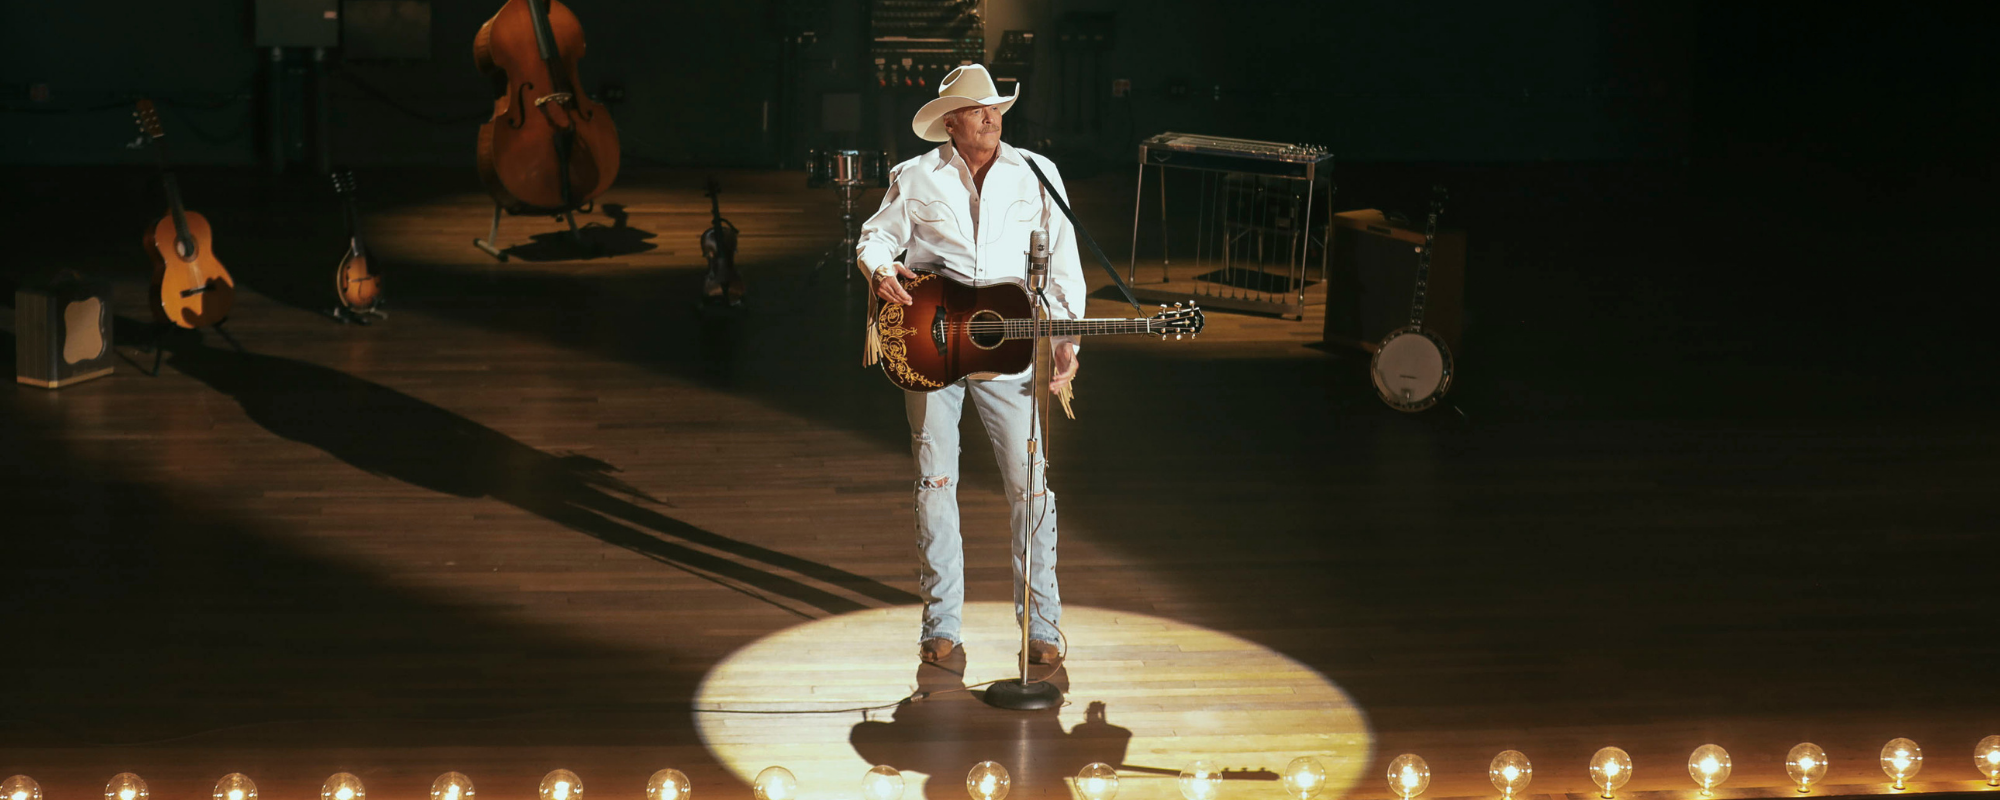 WATCH: Alan Jackson Reiterates His Reverence for Country Music Tradition in New Music Video “Where Have You Gone”